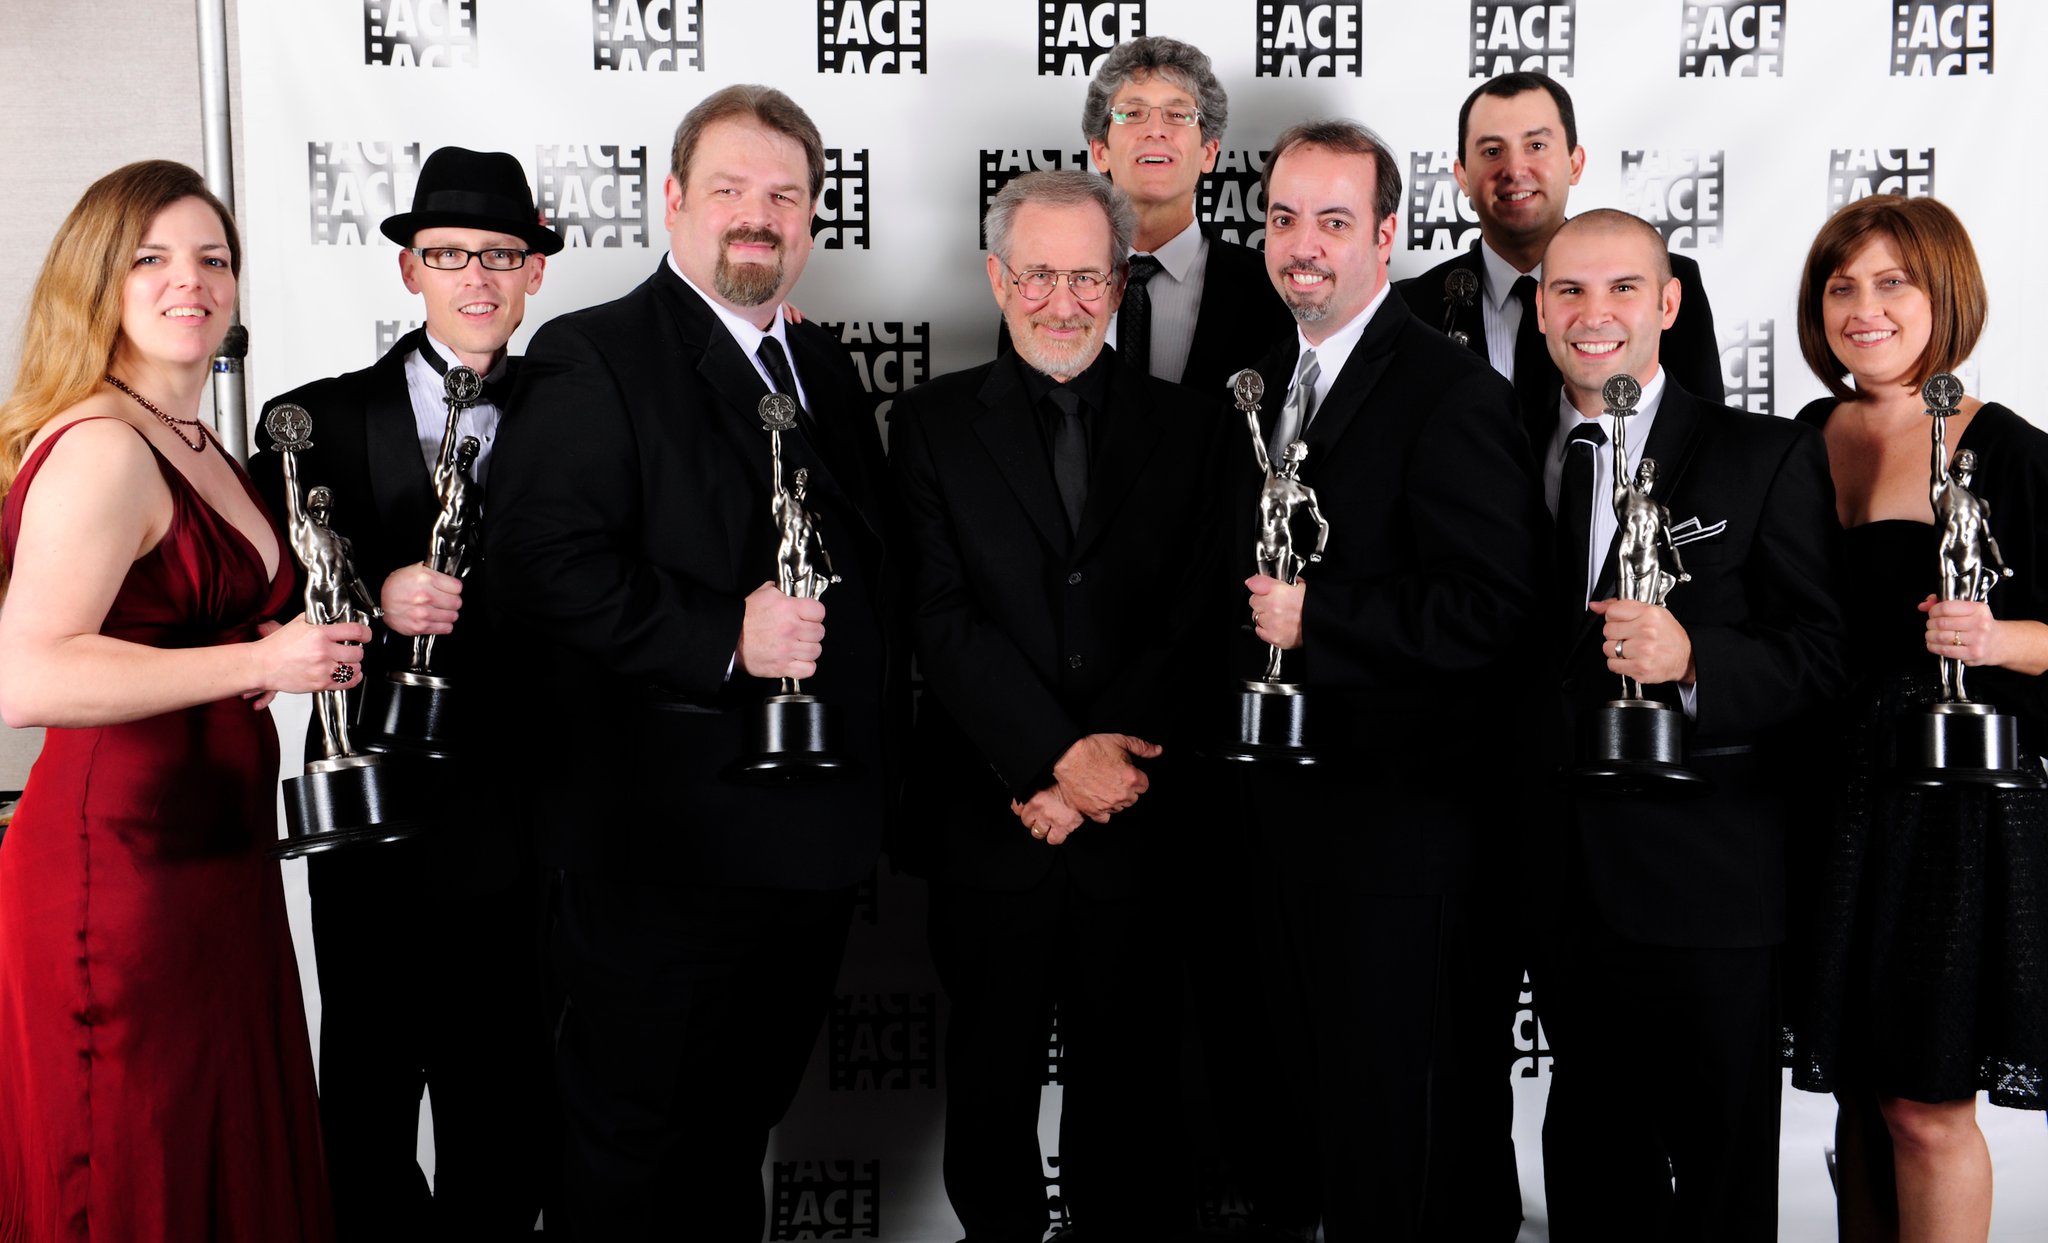 Hilary Robertson, Johnny Skaare, Mark S. Andrew, Steven Spielberg, Rob Goubeaux, Paul J. Coyne, Jeremy Gantz, Ken Yankee and Heather Abell. Winners of ACE Eddie Award for If You Really Knew Me